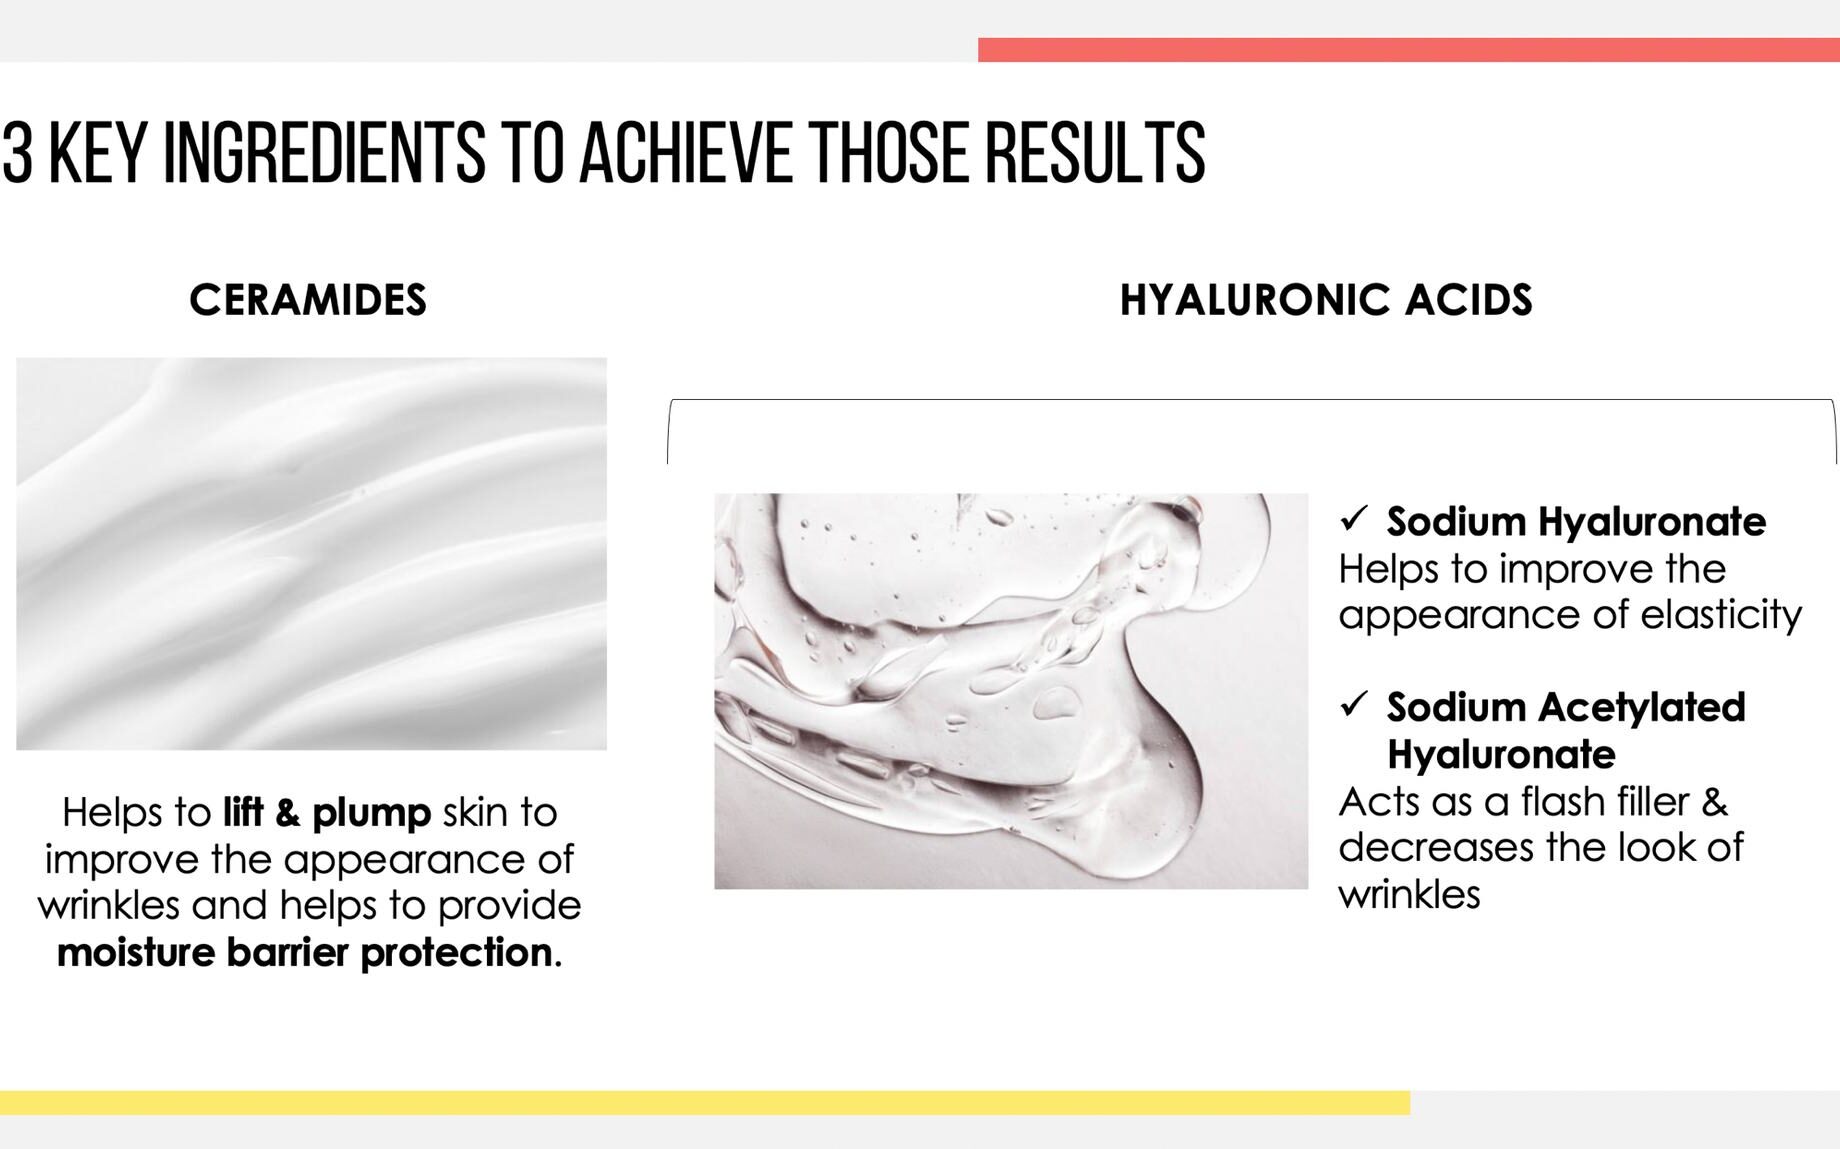 The three key ingredients of the Mighty Plump Ceramide Water Cream: Ceramides, Sodium Hyaluronate, and Sodium Acetylated Hyaluronate